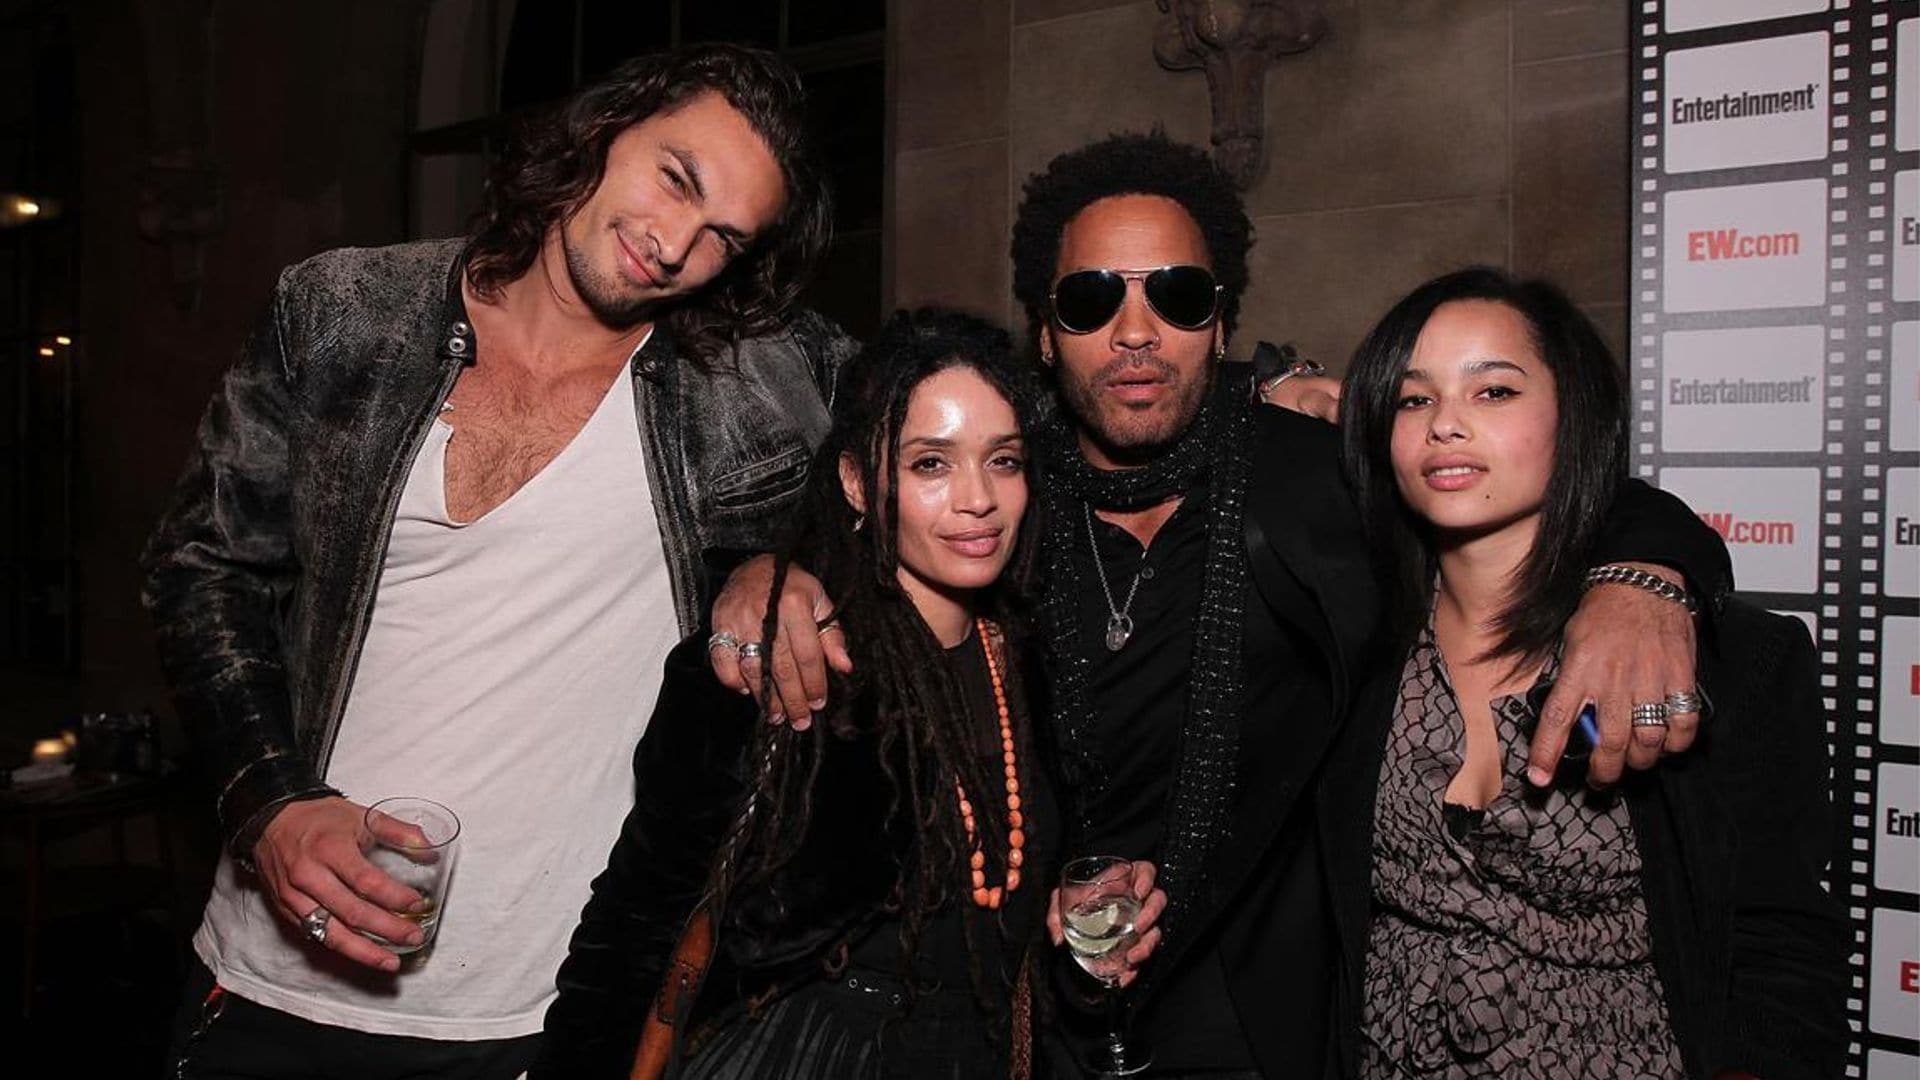 Lenny Kravitz opens up about his unconventional friendship with Jason Momoa